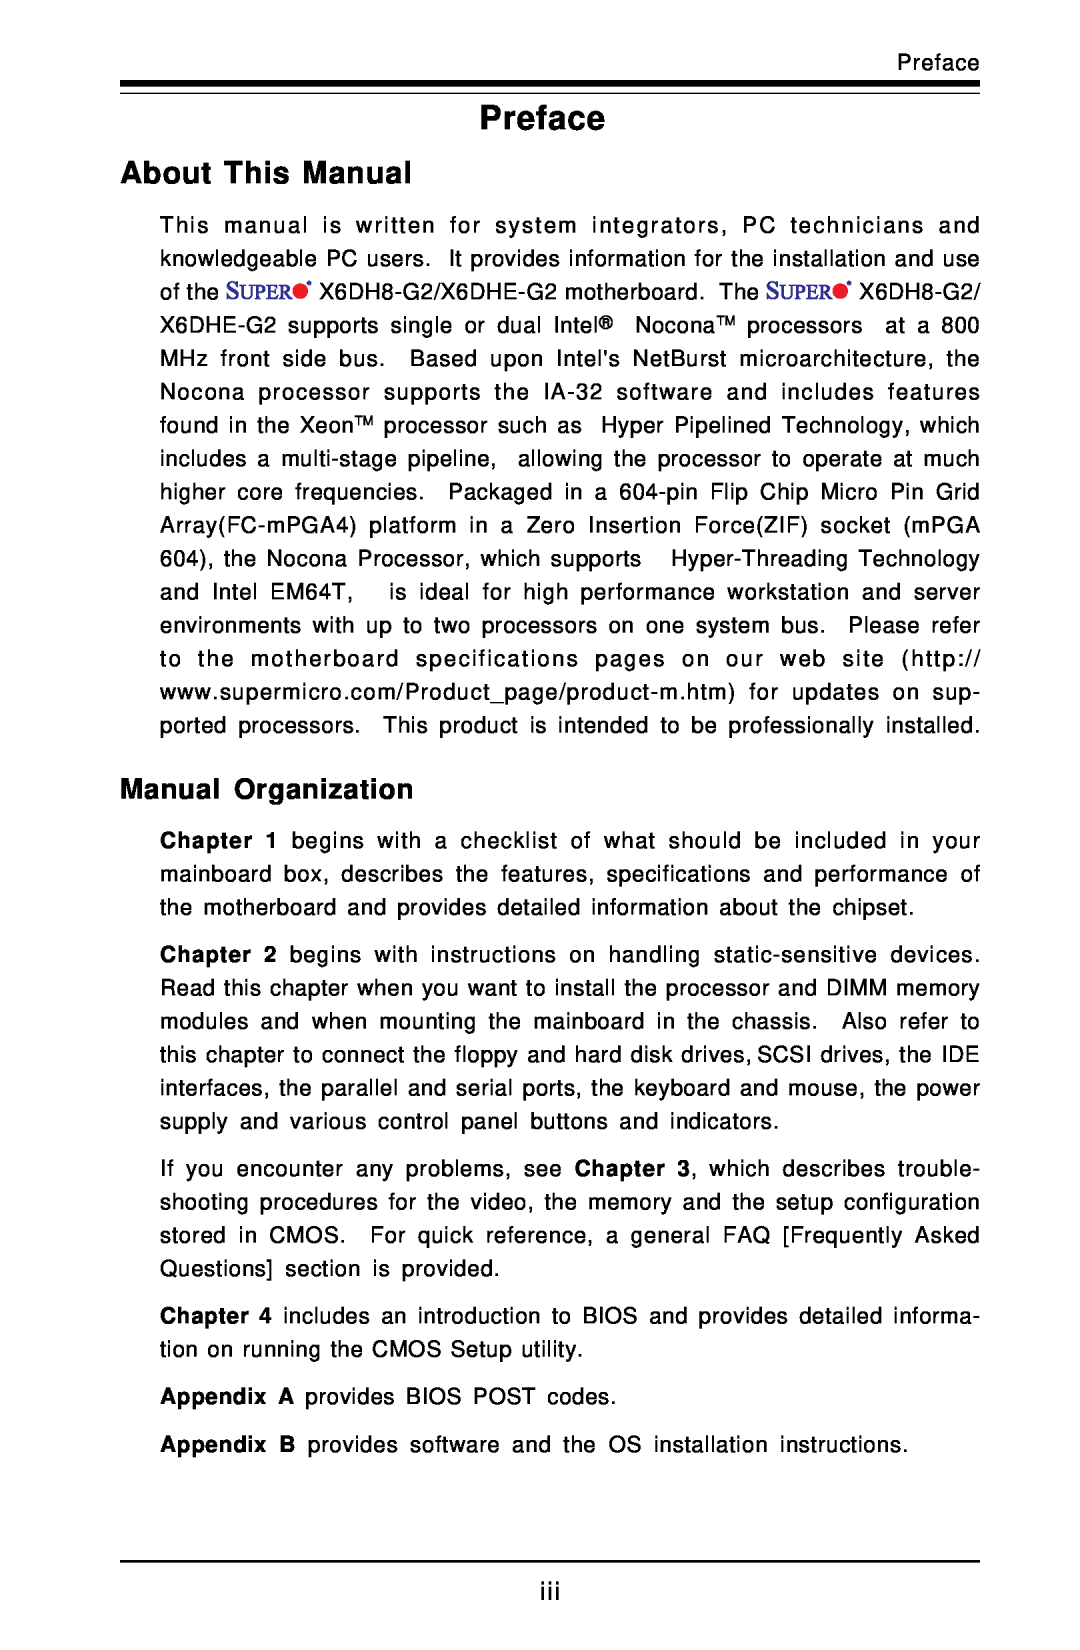 SUPER MICRO Computer X6DHE-G2, X6DH8-G2 manual Preface, About This Manual, Manual Organization 